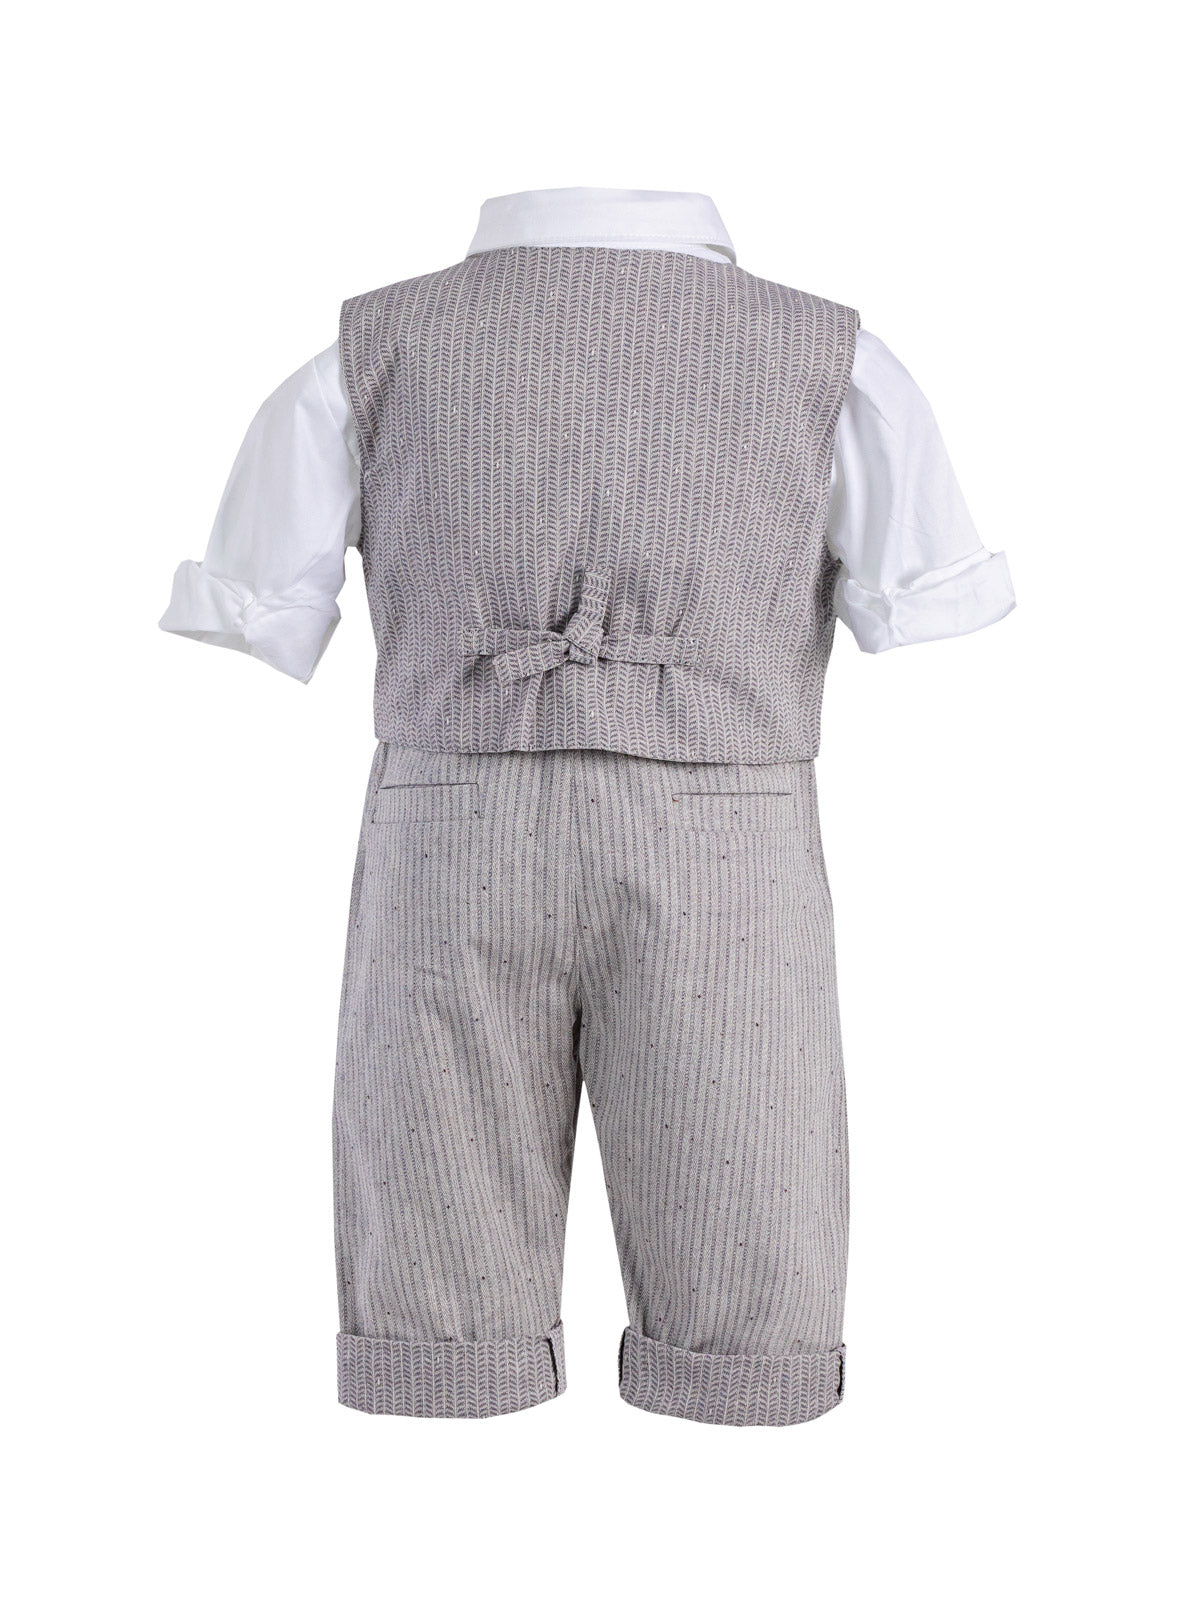 Baby suit with checkered pattern for boy - POTTER